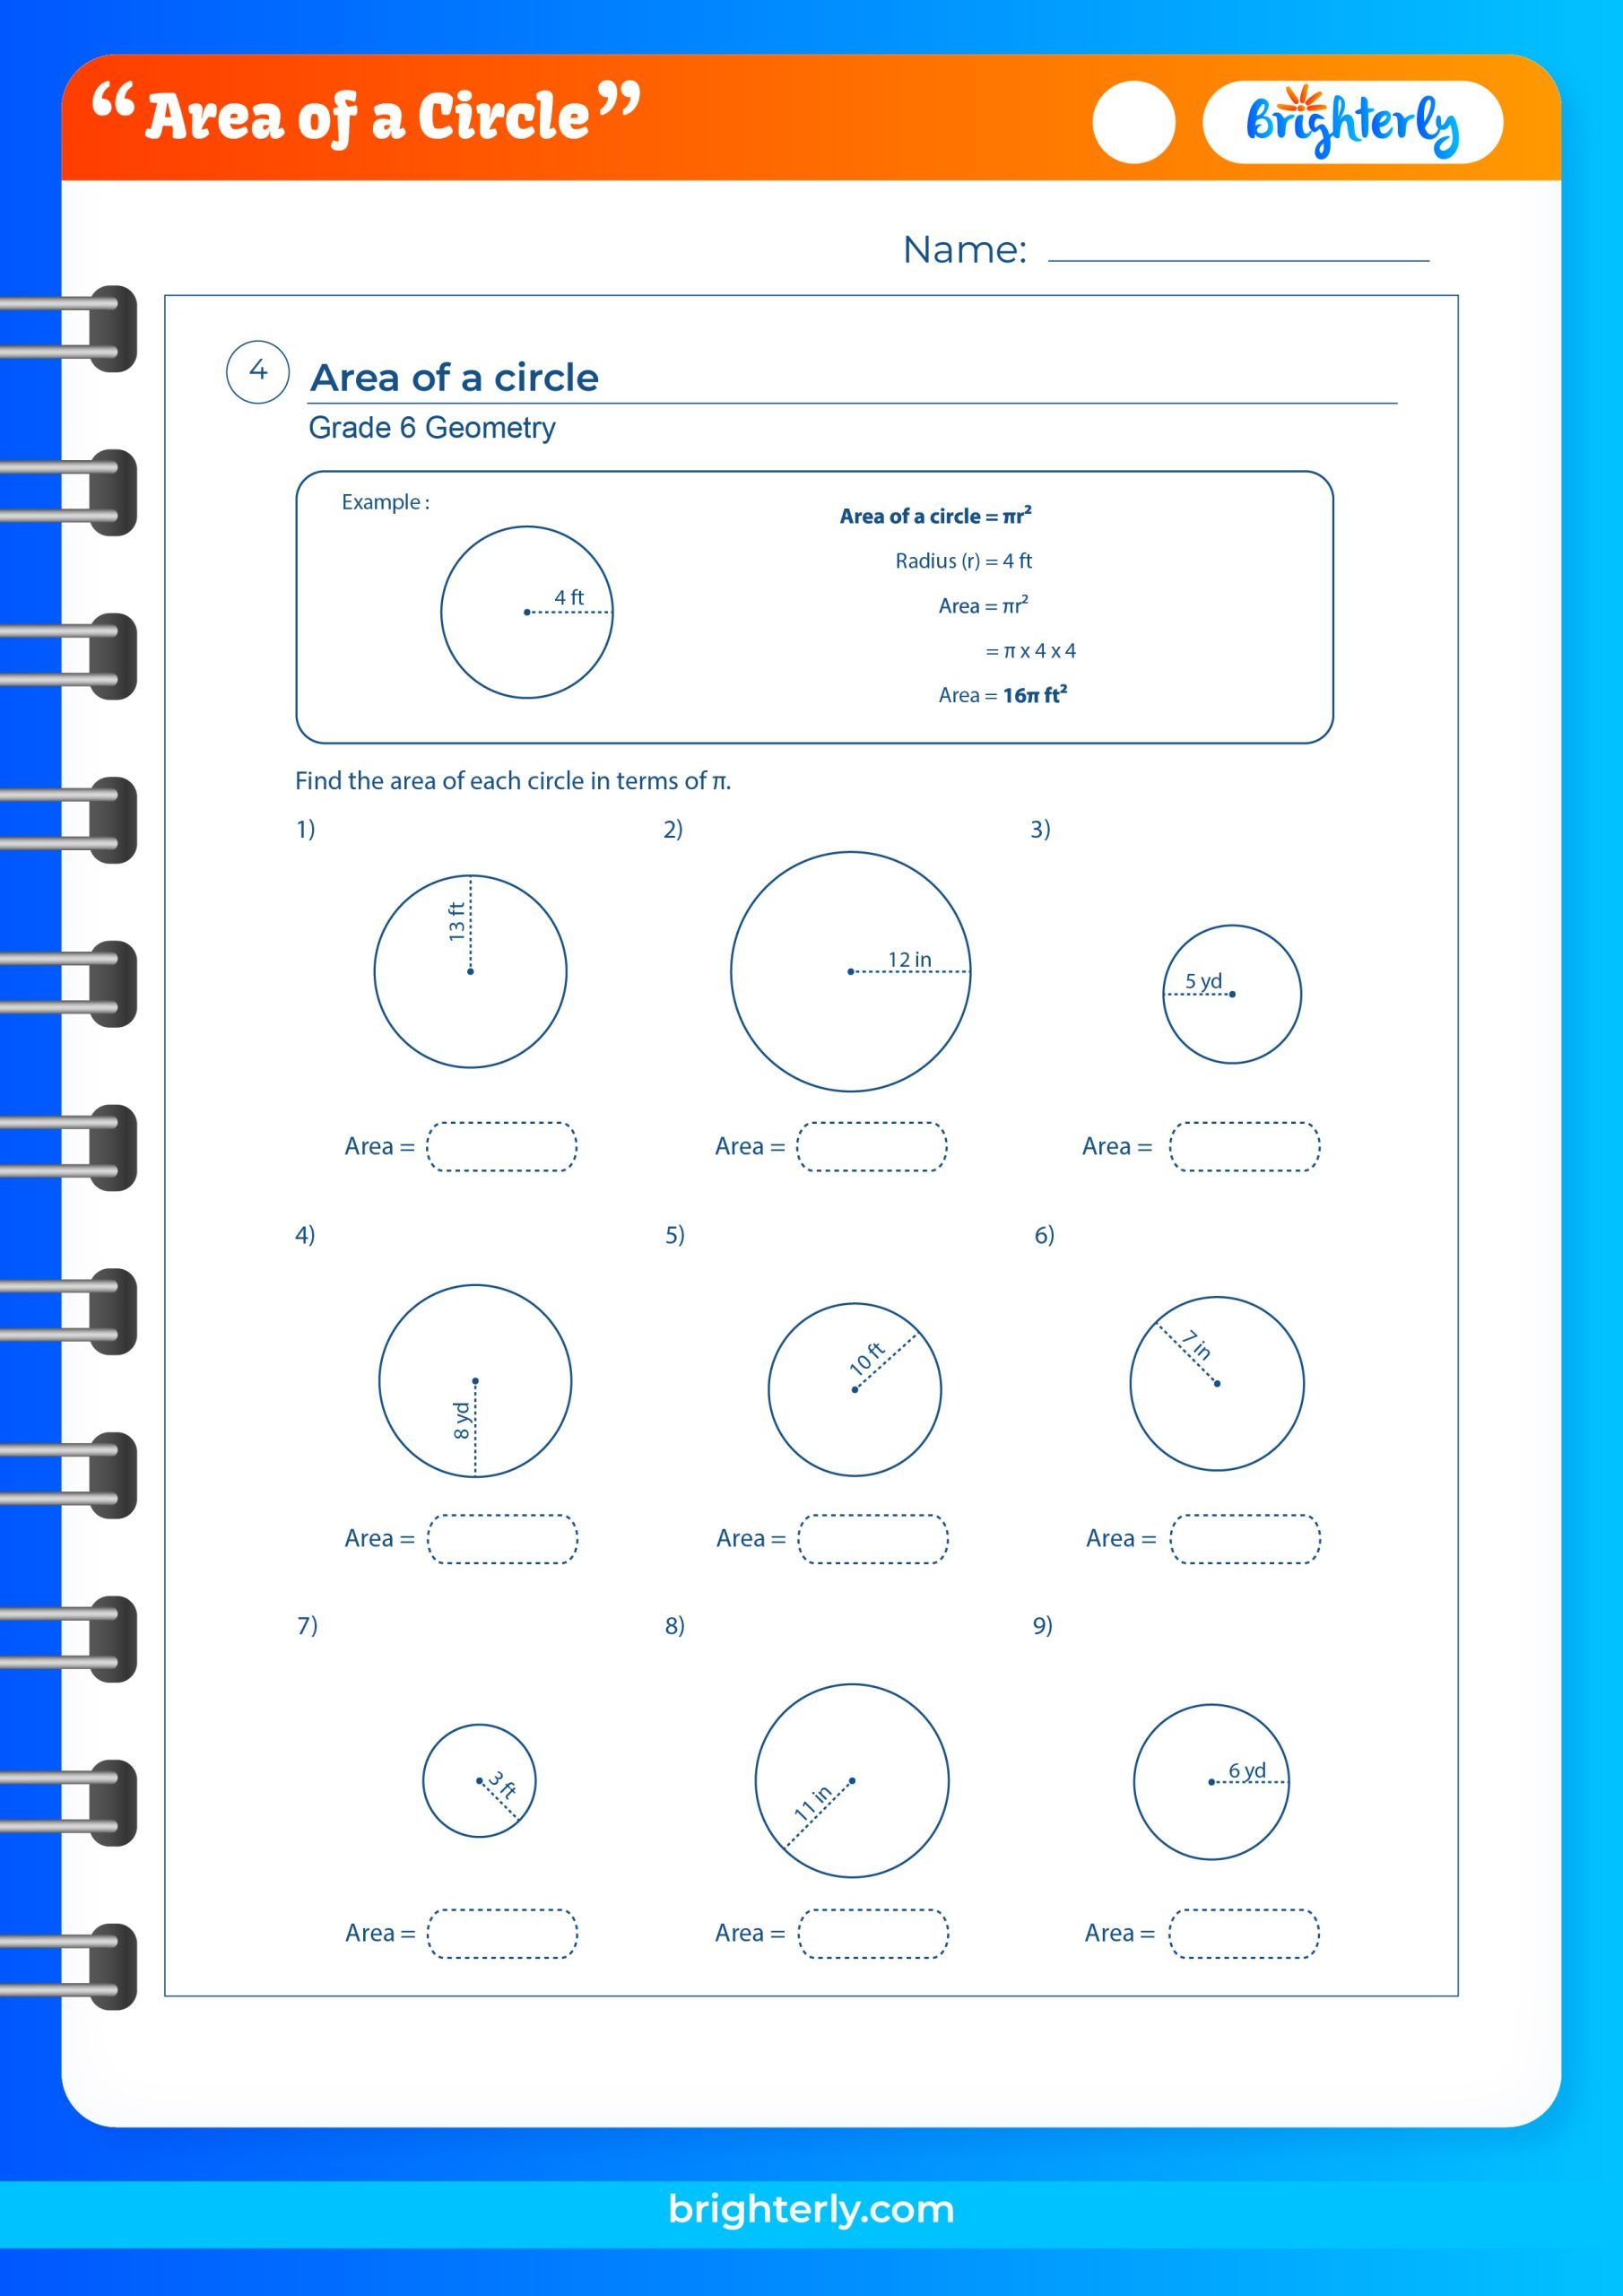 free-printable-area-of-a-circle-worksheets-pdfs-brighterly